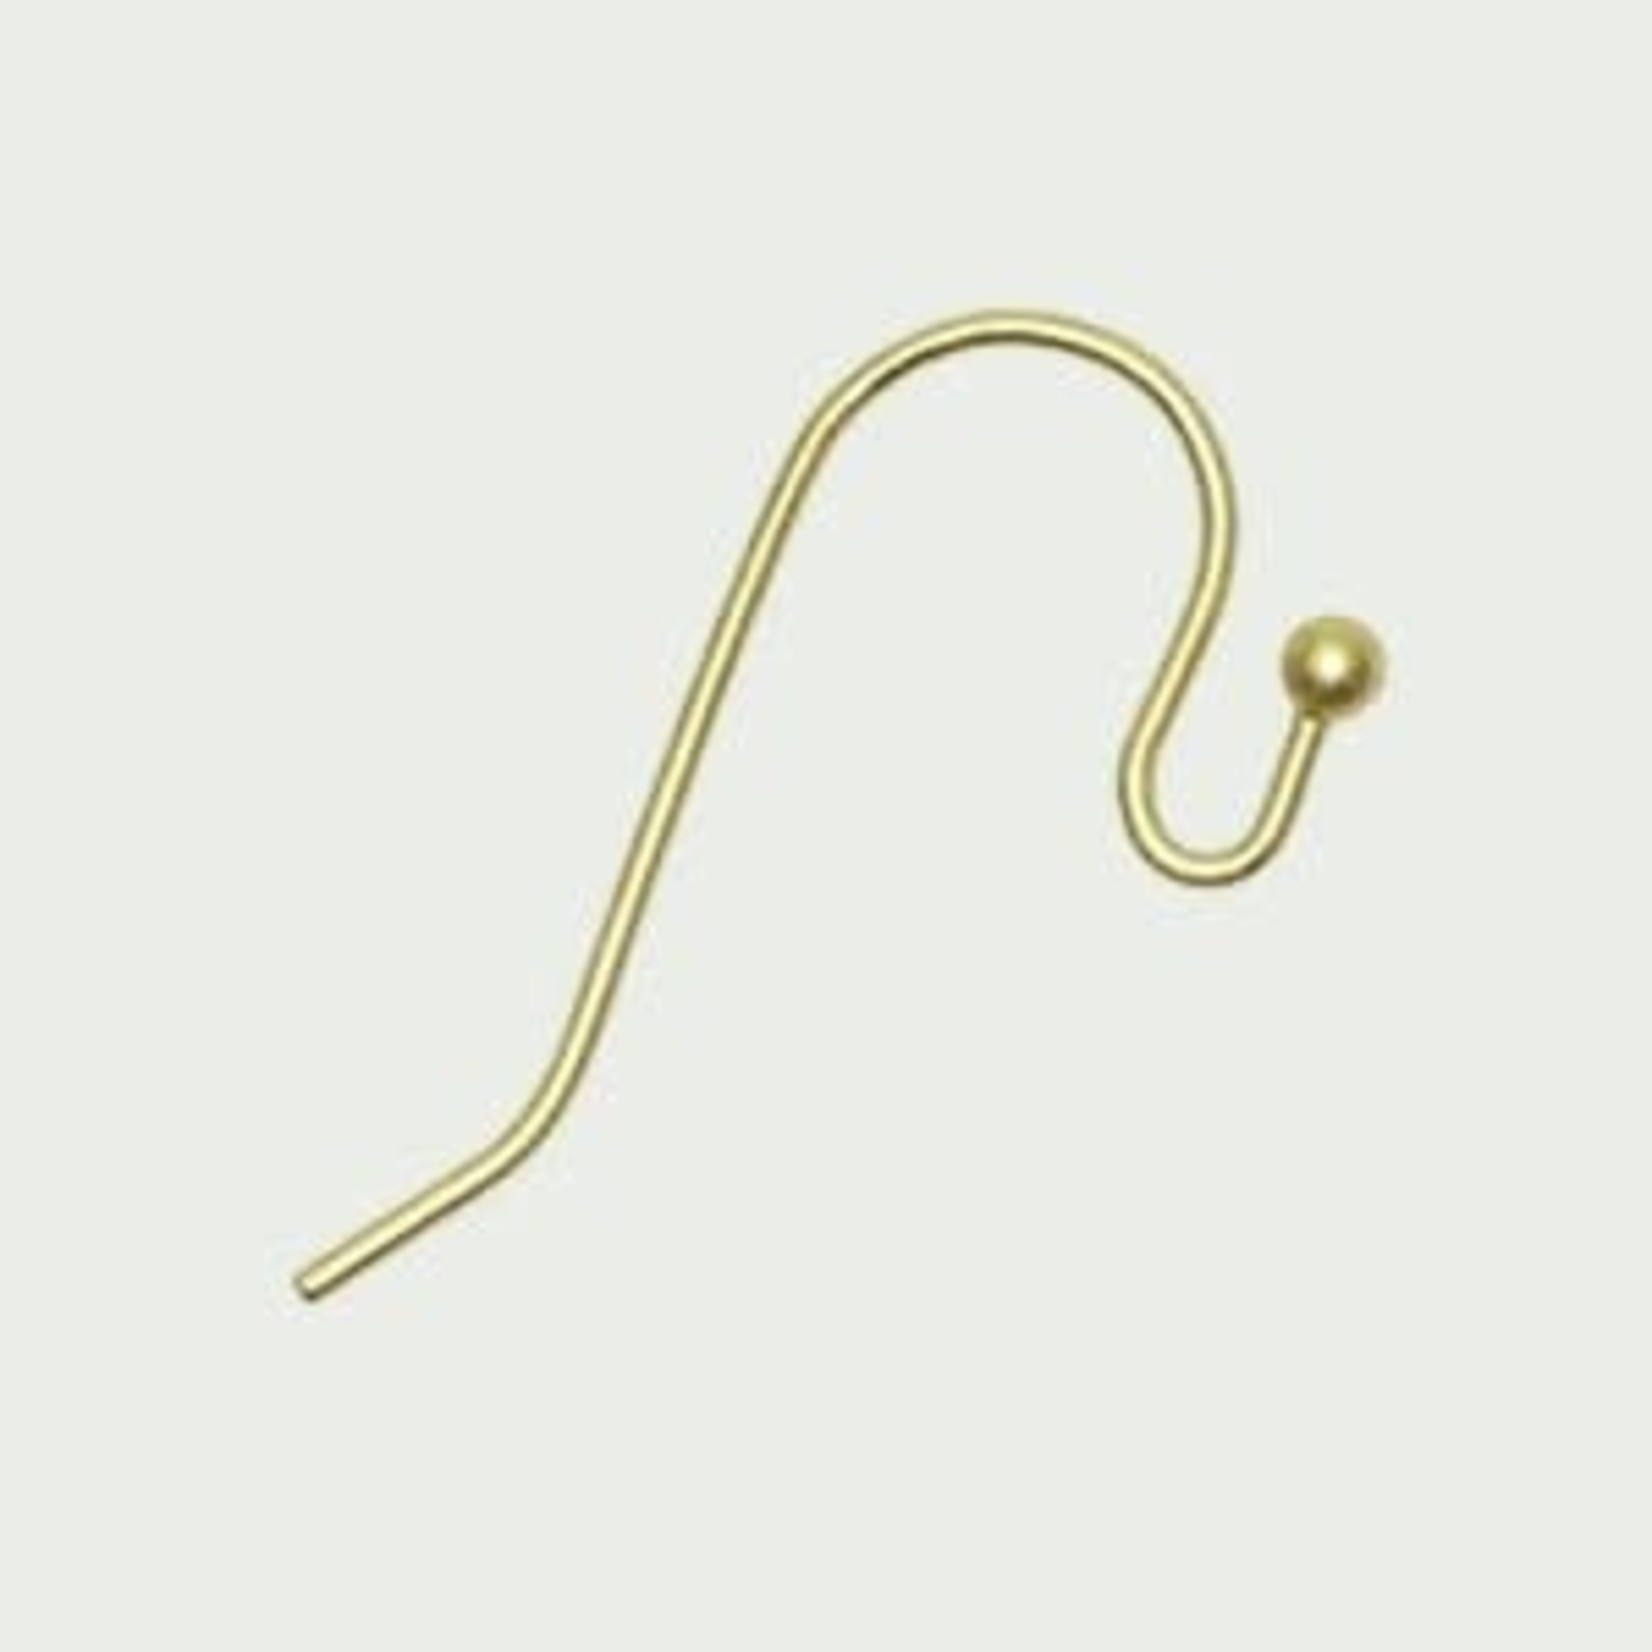 French Earwire Nickel-Free Satin Gold Plated - 50 pieces - Bead Inspirations